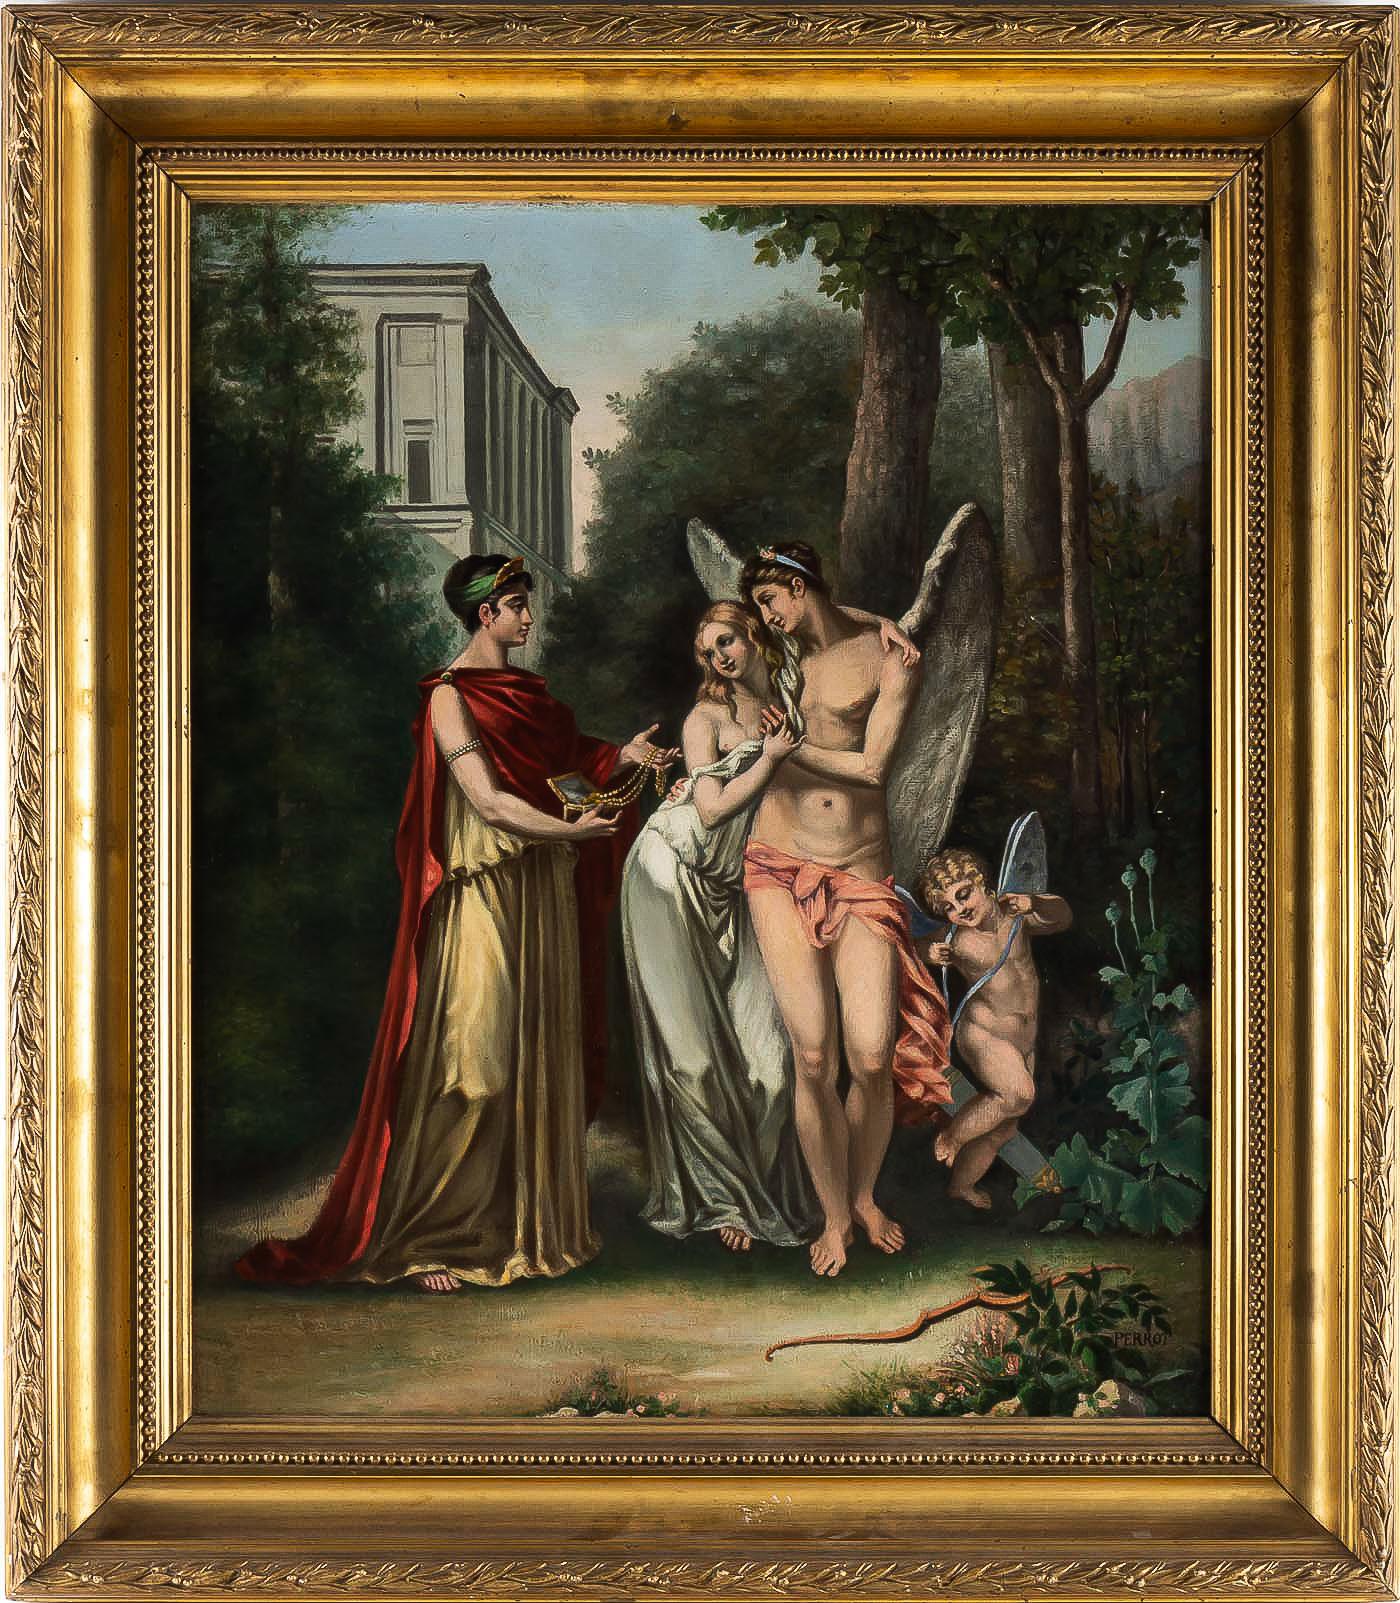 Adolphe Perrot Oil on Canvas Allegory of Love and Friendship 19th-Century

Interesting and decorative oil on canvas, depicting Allegory of Love and Friendship.

19th-century French school to a manner of Pierre Paul Prud’hon, circa